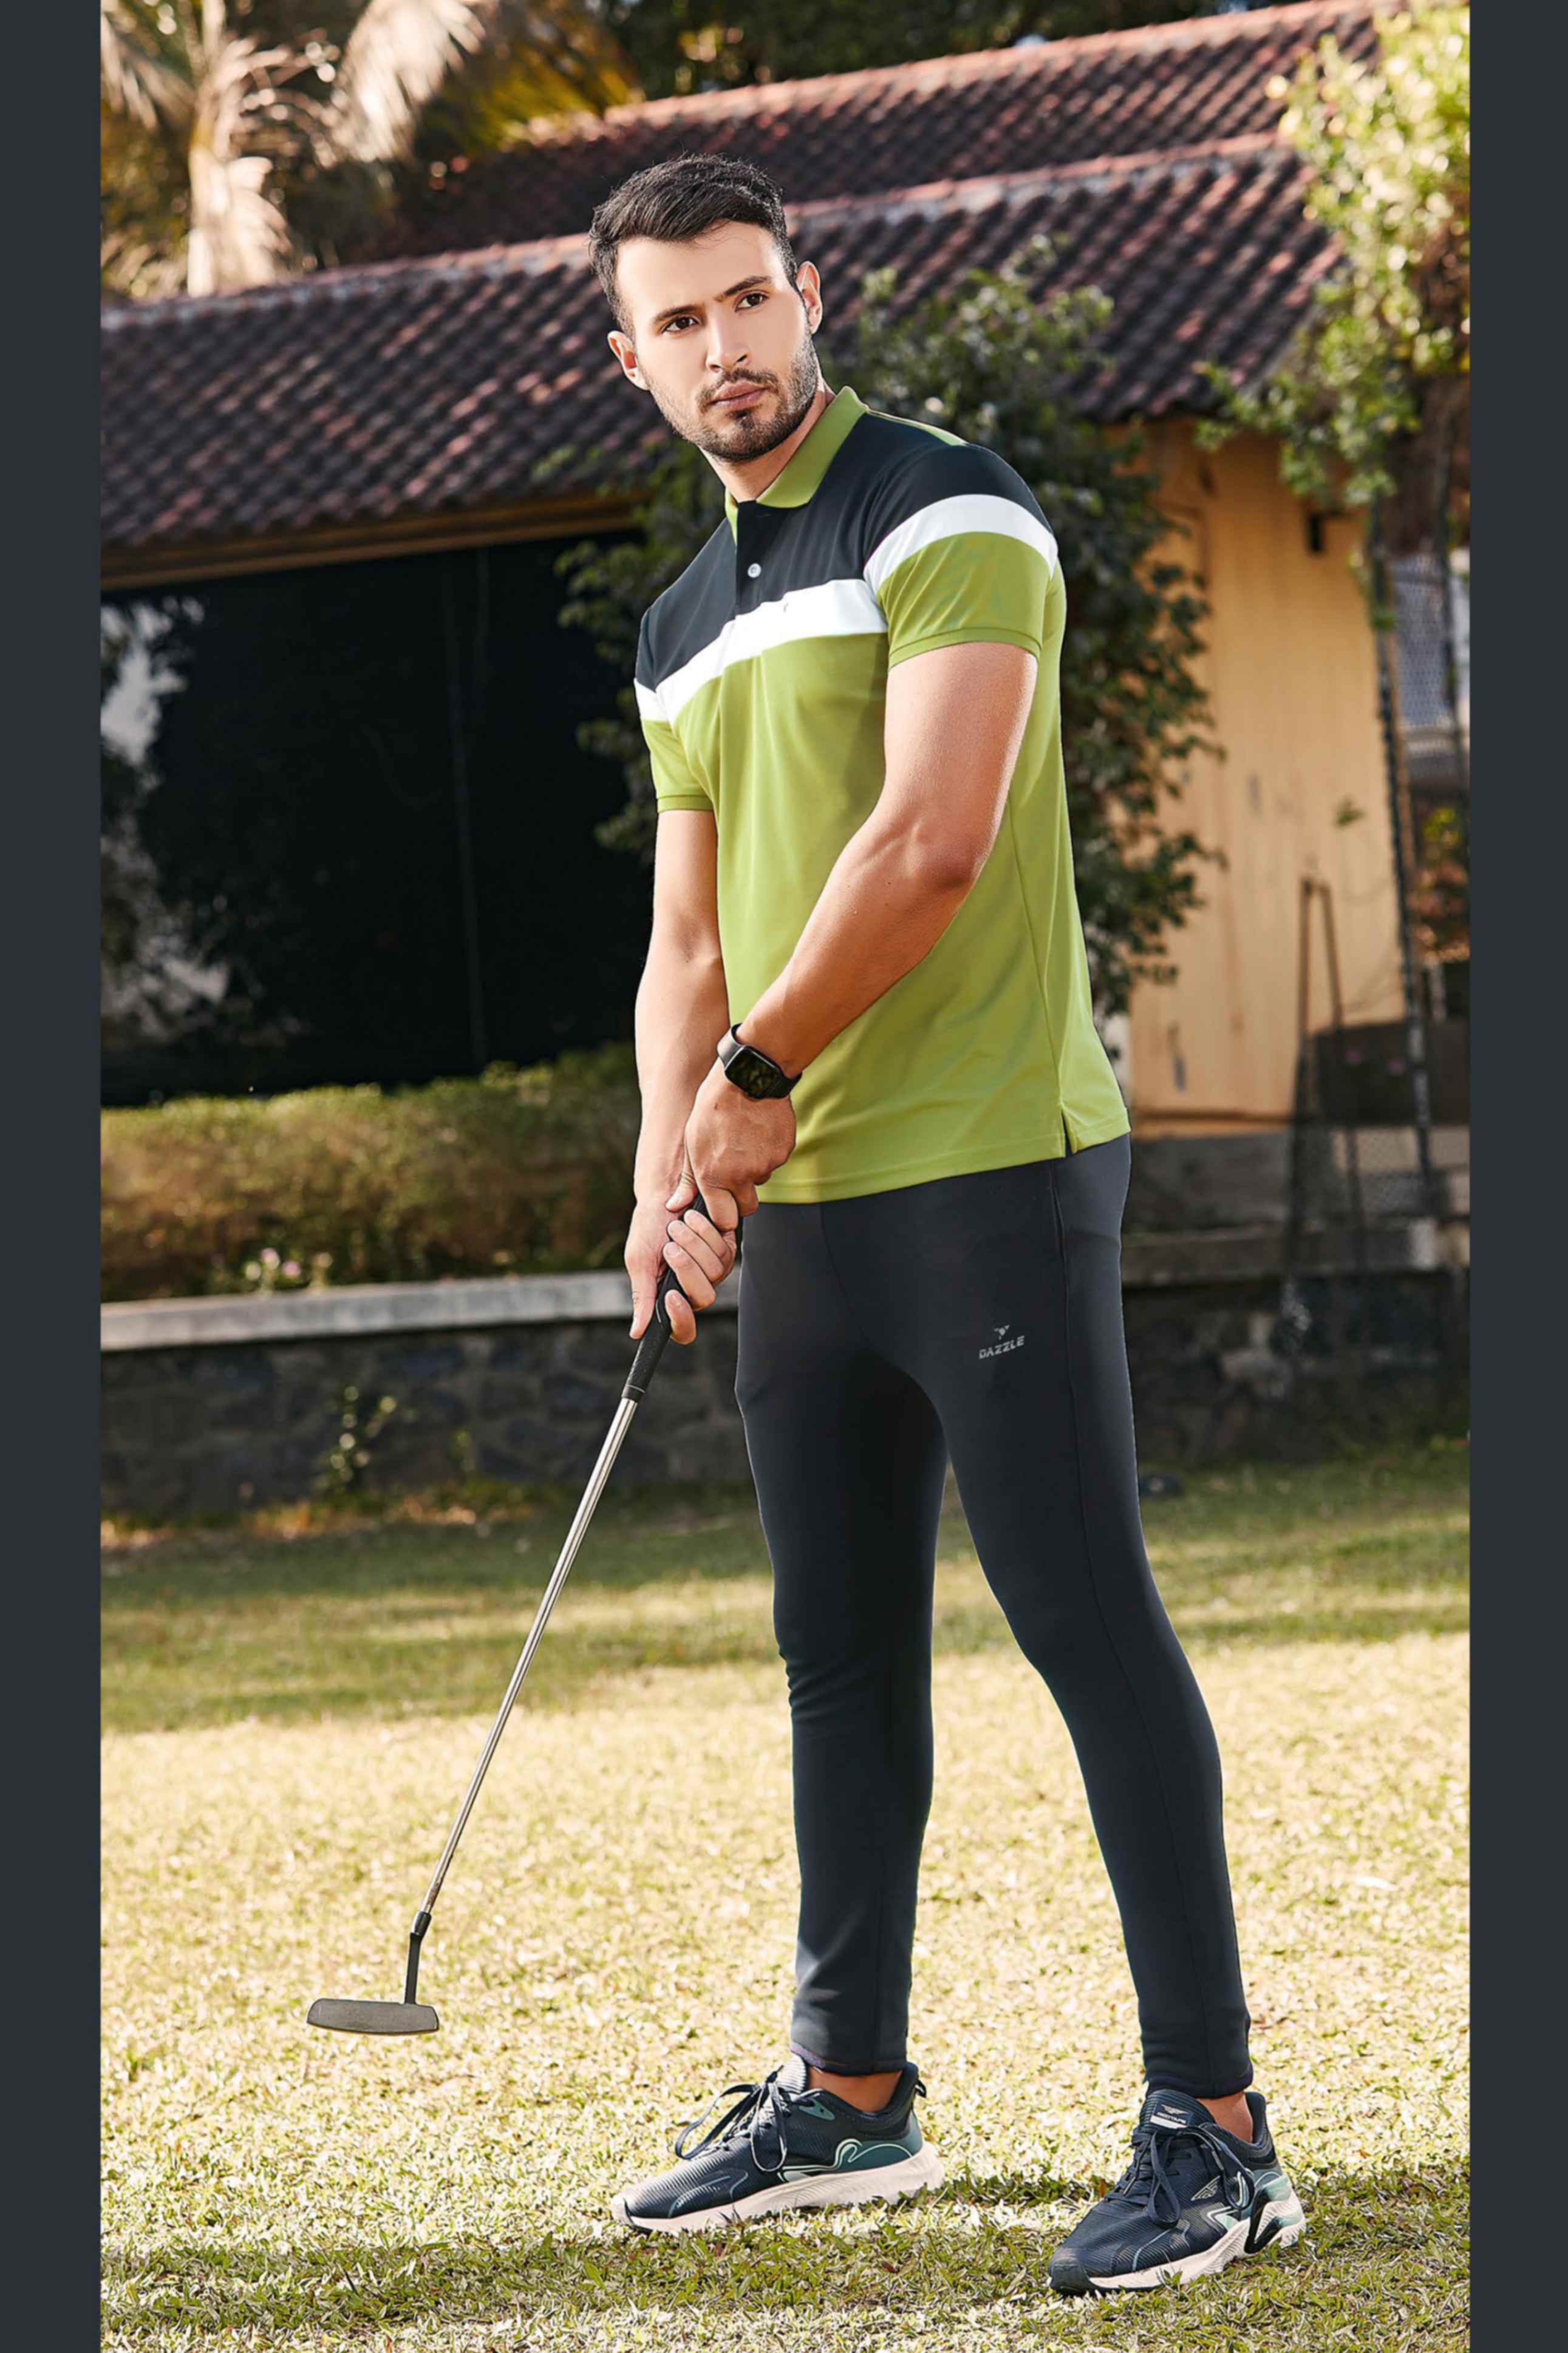 Buy Online, Leisure Wear For Men, High Quality Active Wear